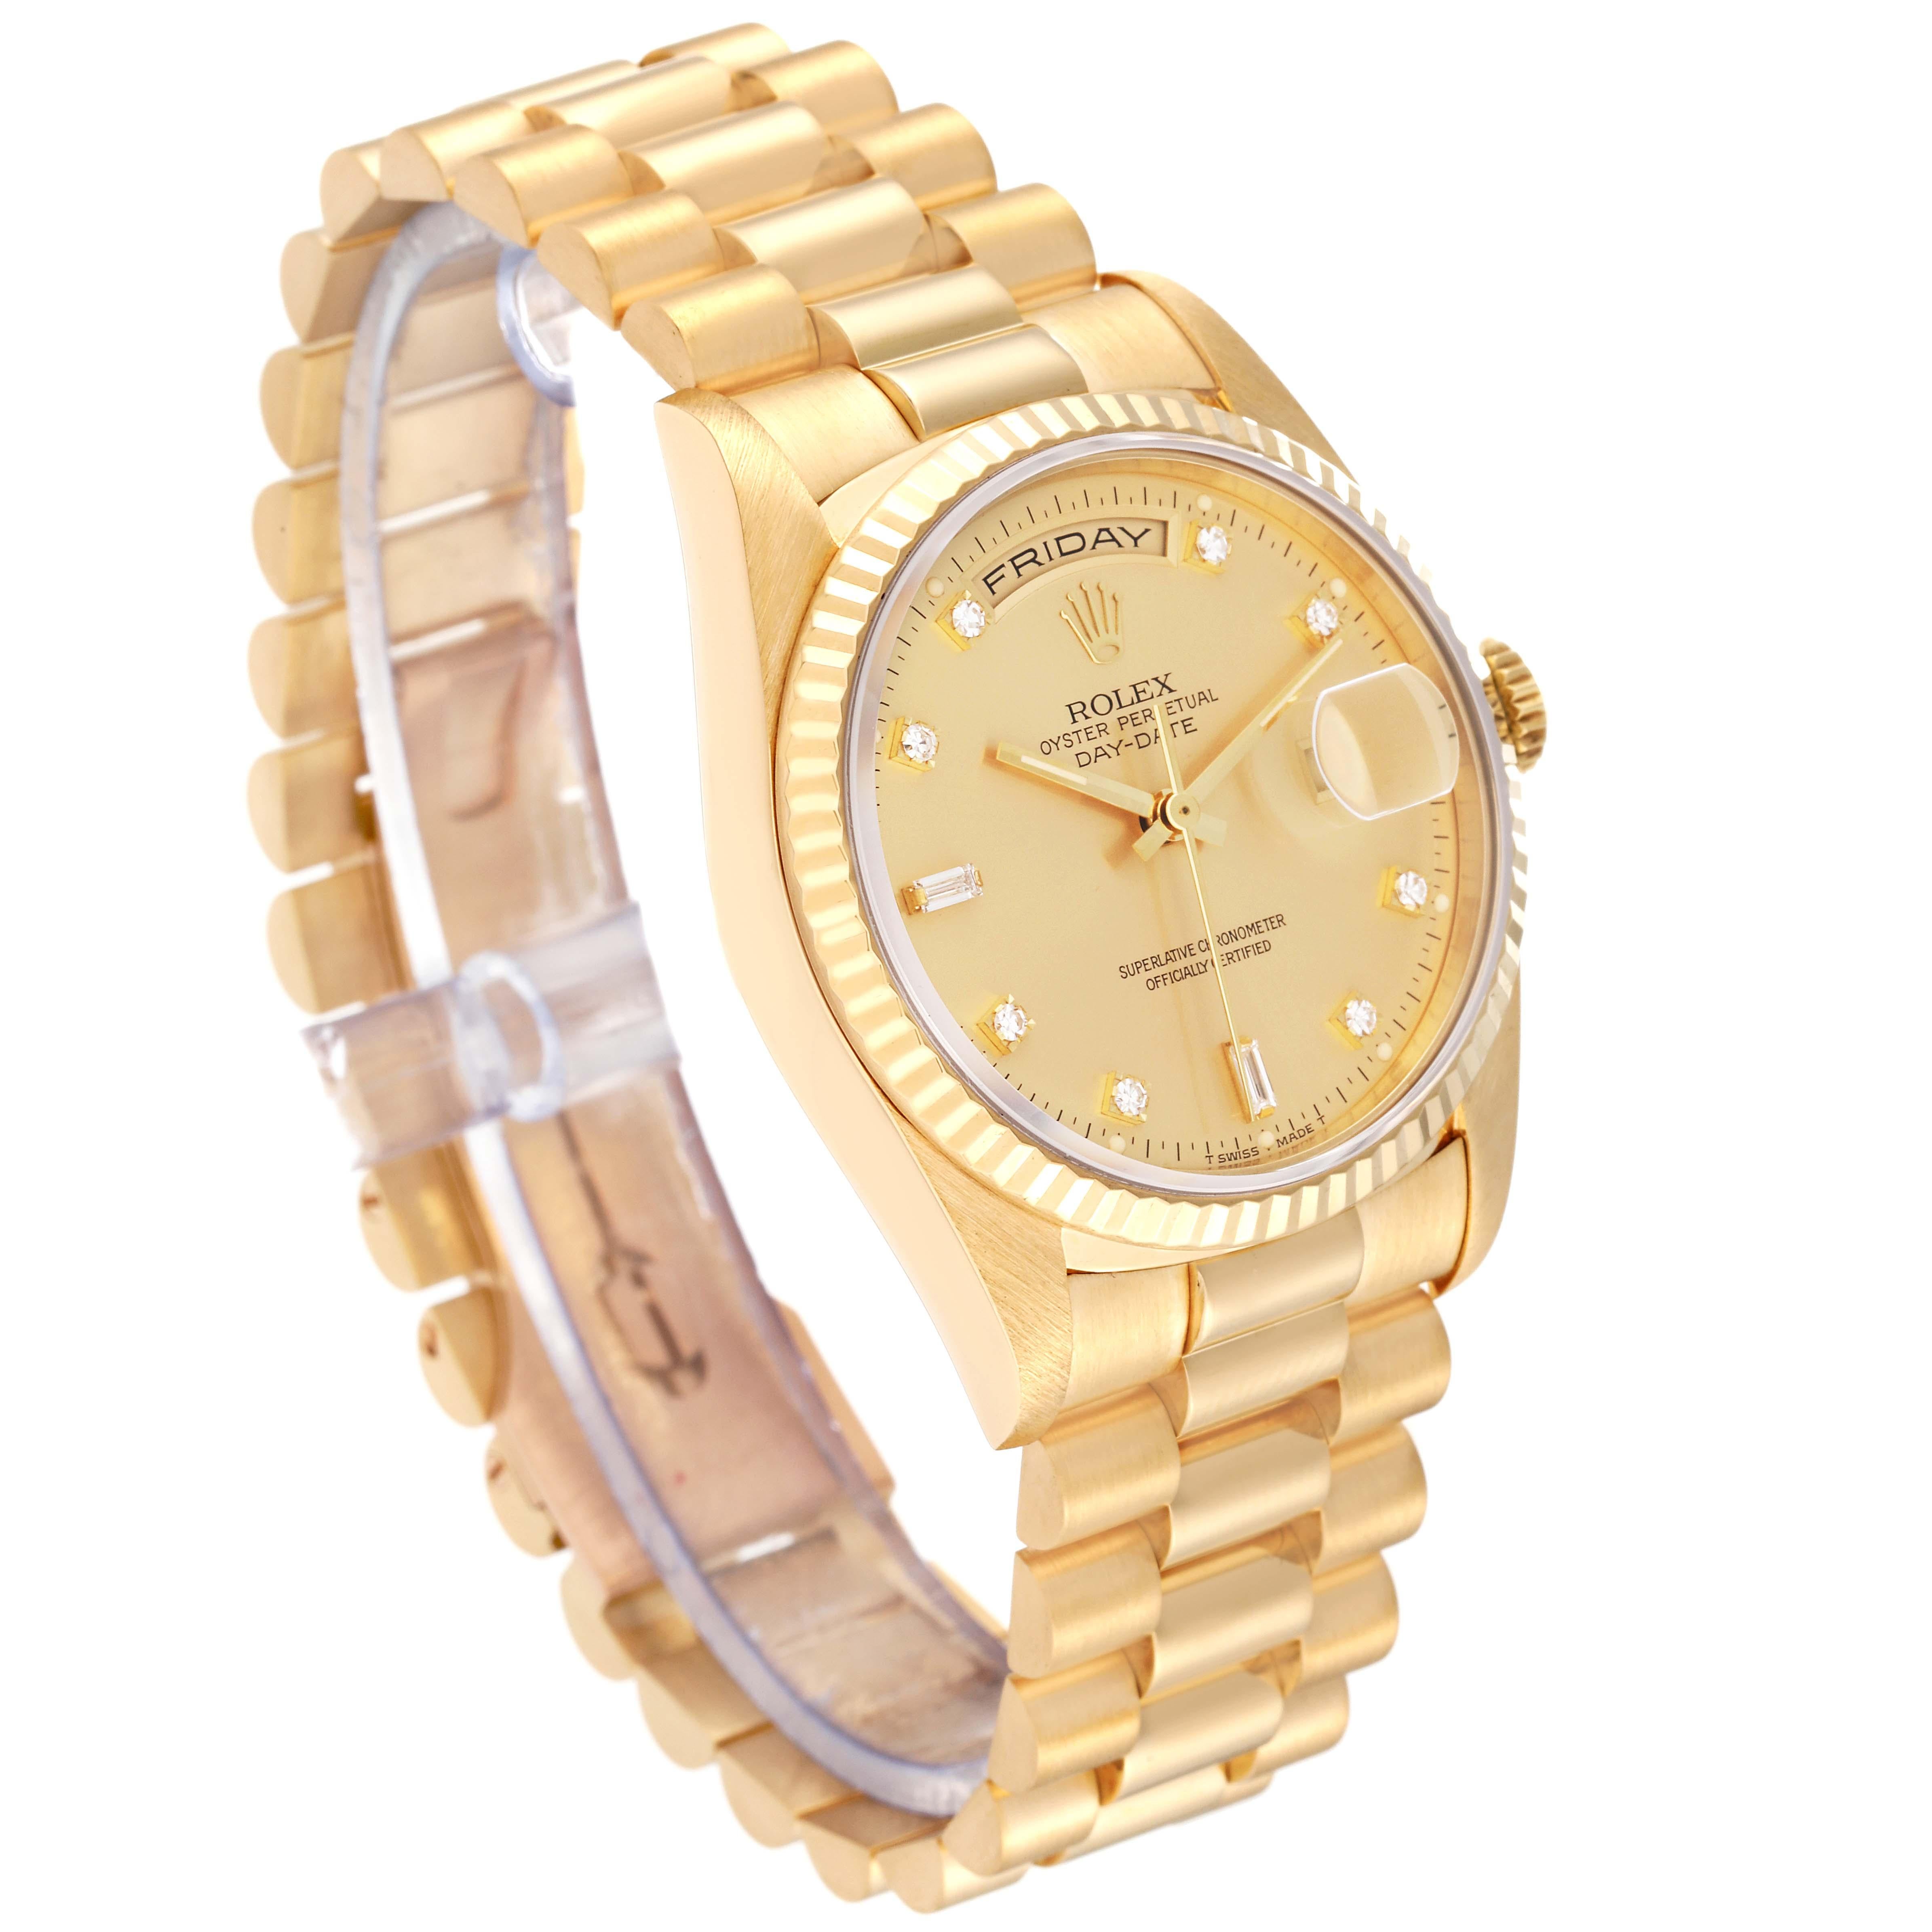 Rolex President Day-Date Yellow Gold Champagne Diamond Dial Mens Watch 18238 In Excellent Condition For Sale In Atlanta, GA